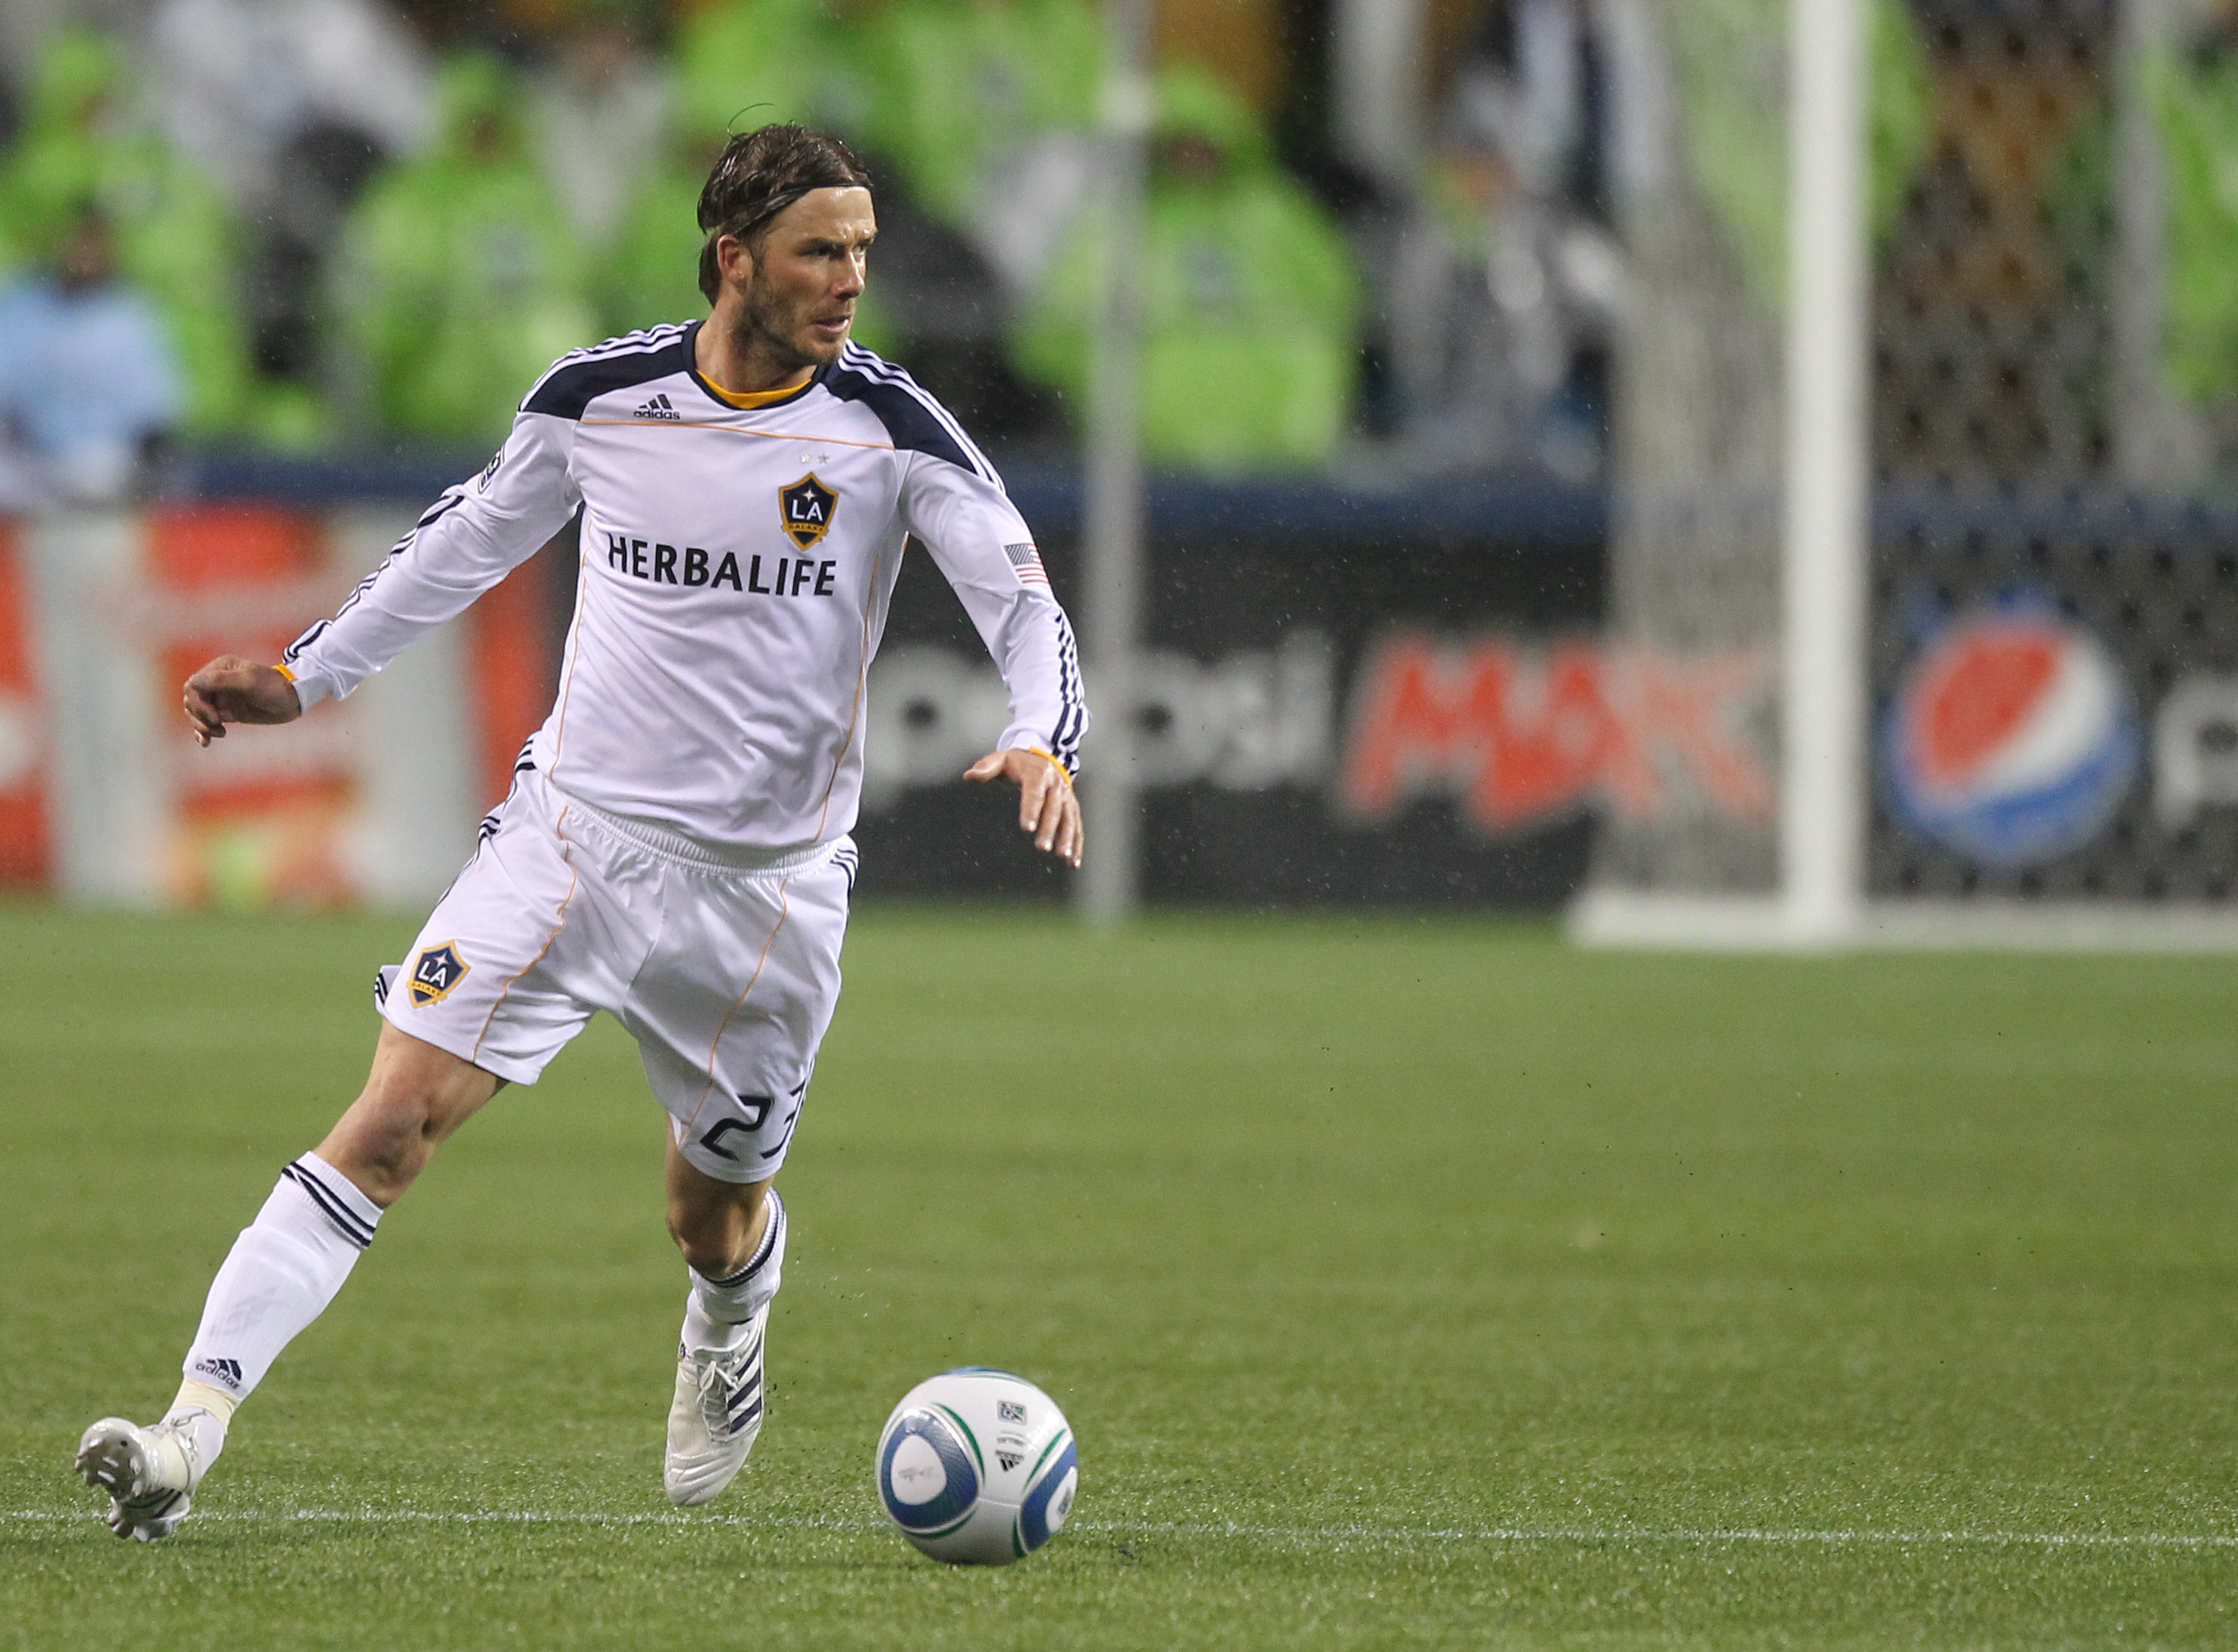 SEATTLE, WA - MARCH 15:  David Beckham #23 of the Los Angeles Galaxy dribbles against the Seattle Sounders FC at Qwest Field on March 15, 2011 in Seattle, Washington. (Photo by Otto Greule Jr/Getty Images)